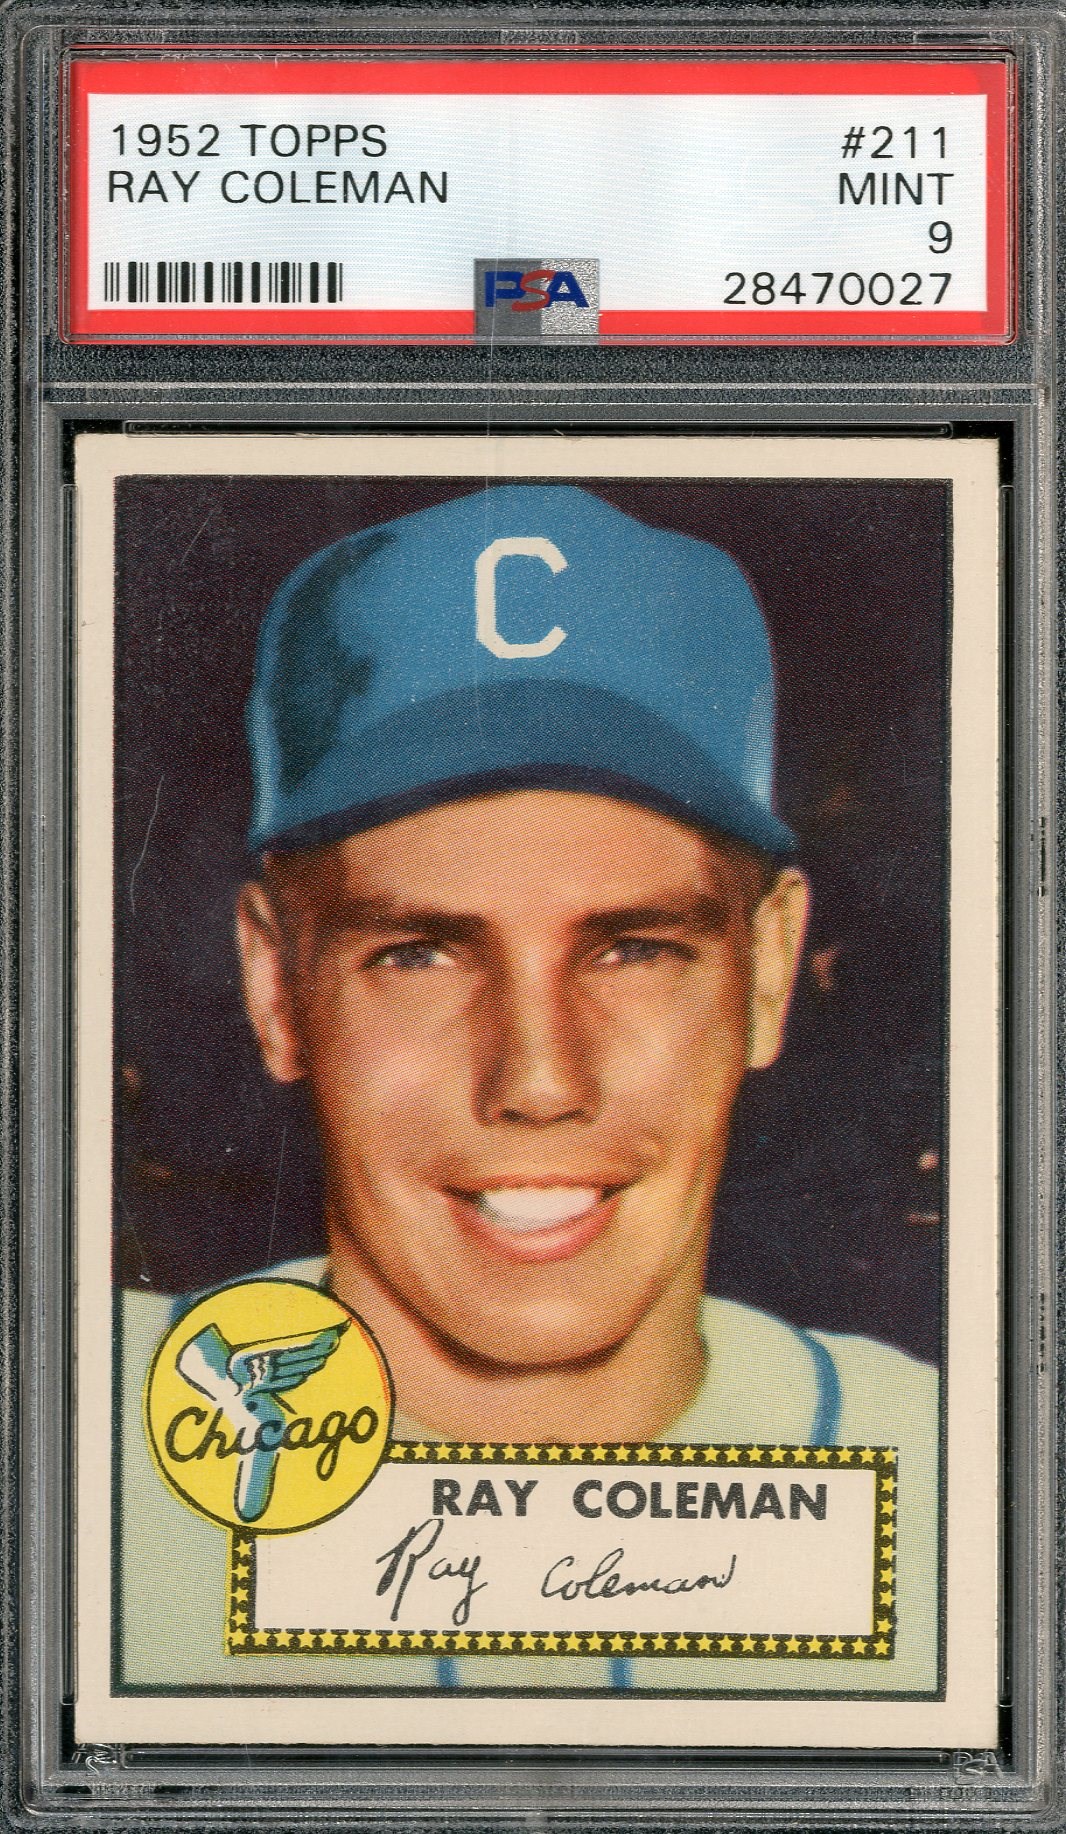 Baseball and Trading Cards - 1952 Topps #211 Ray Coleman - PSA MINT 9 (1 of 2)